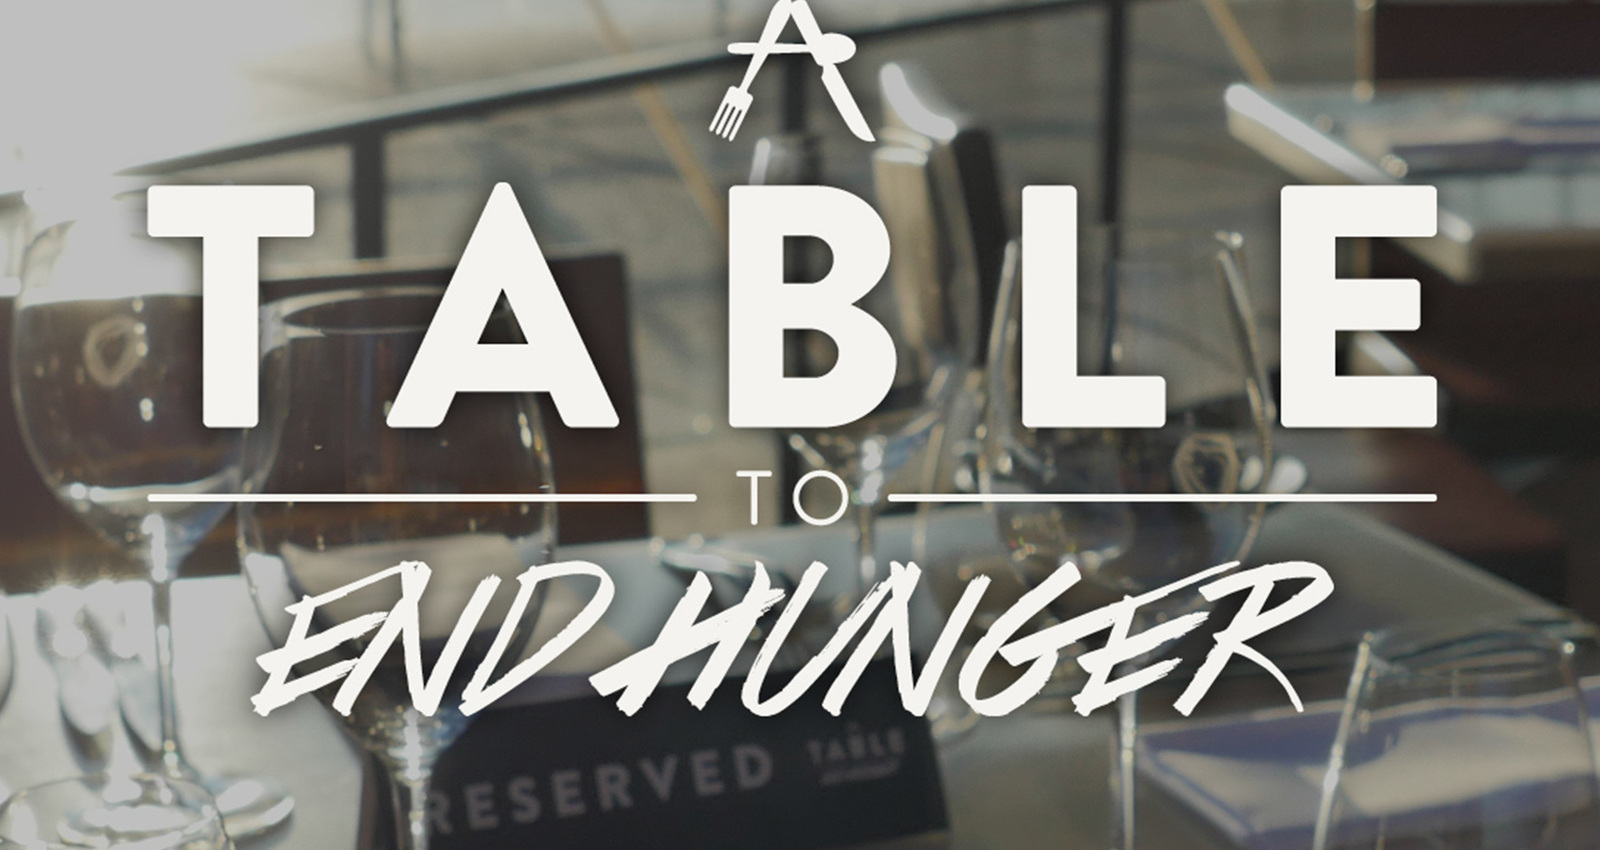 A Table to End Hunger